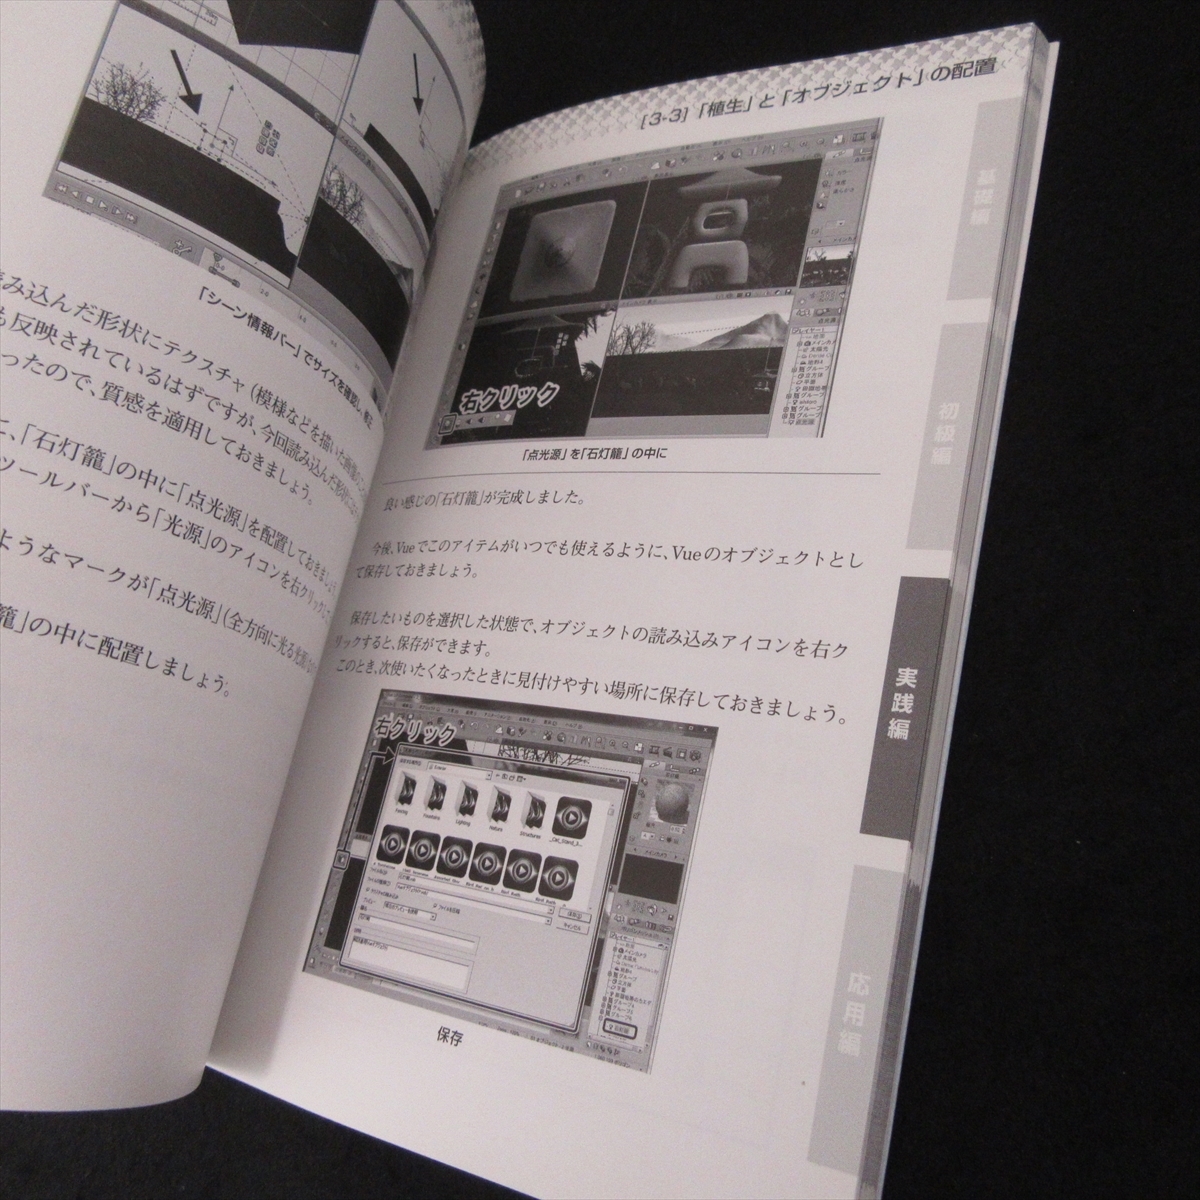  out of print rare book@[Vue scenery CG technique guide ] # sending 185 jpy ... beautiful . engineering company 3D CG townscape making soft [Vue]. how to use I*O BOOKS *